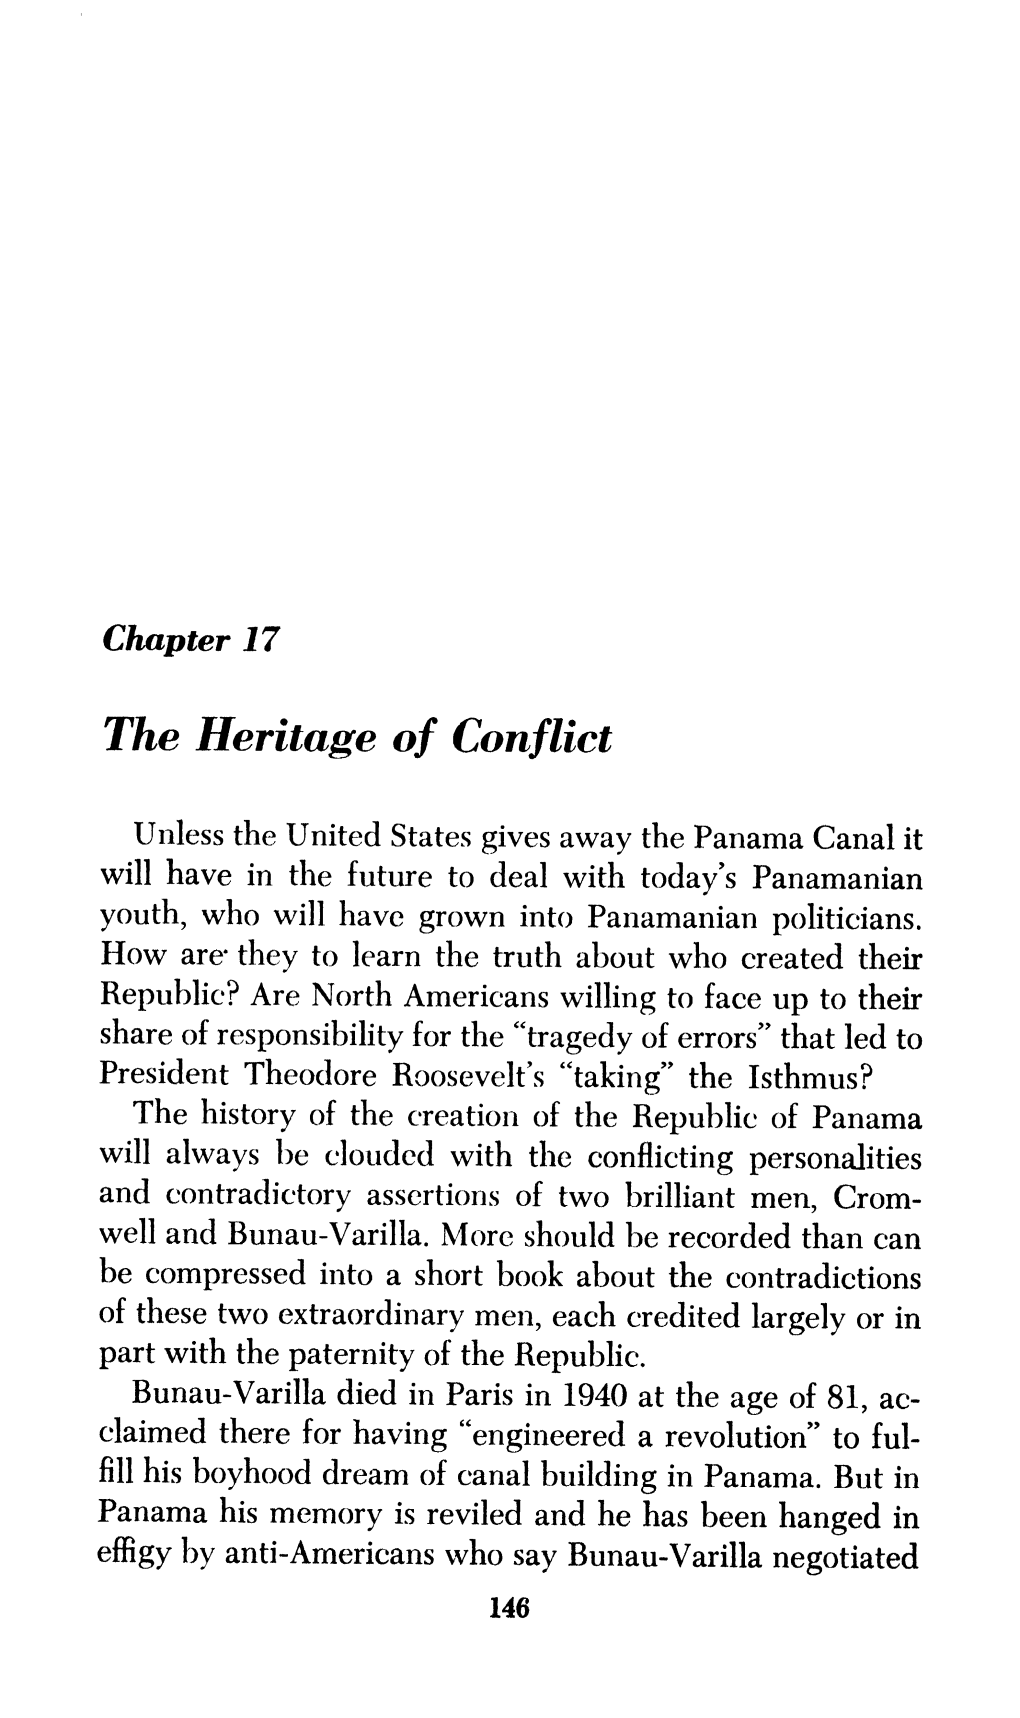 The Heritage of Conflict